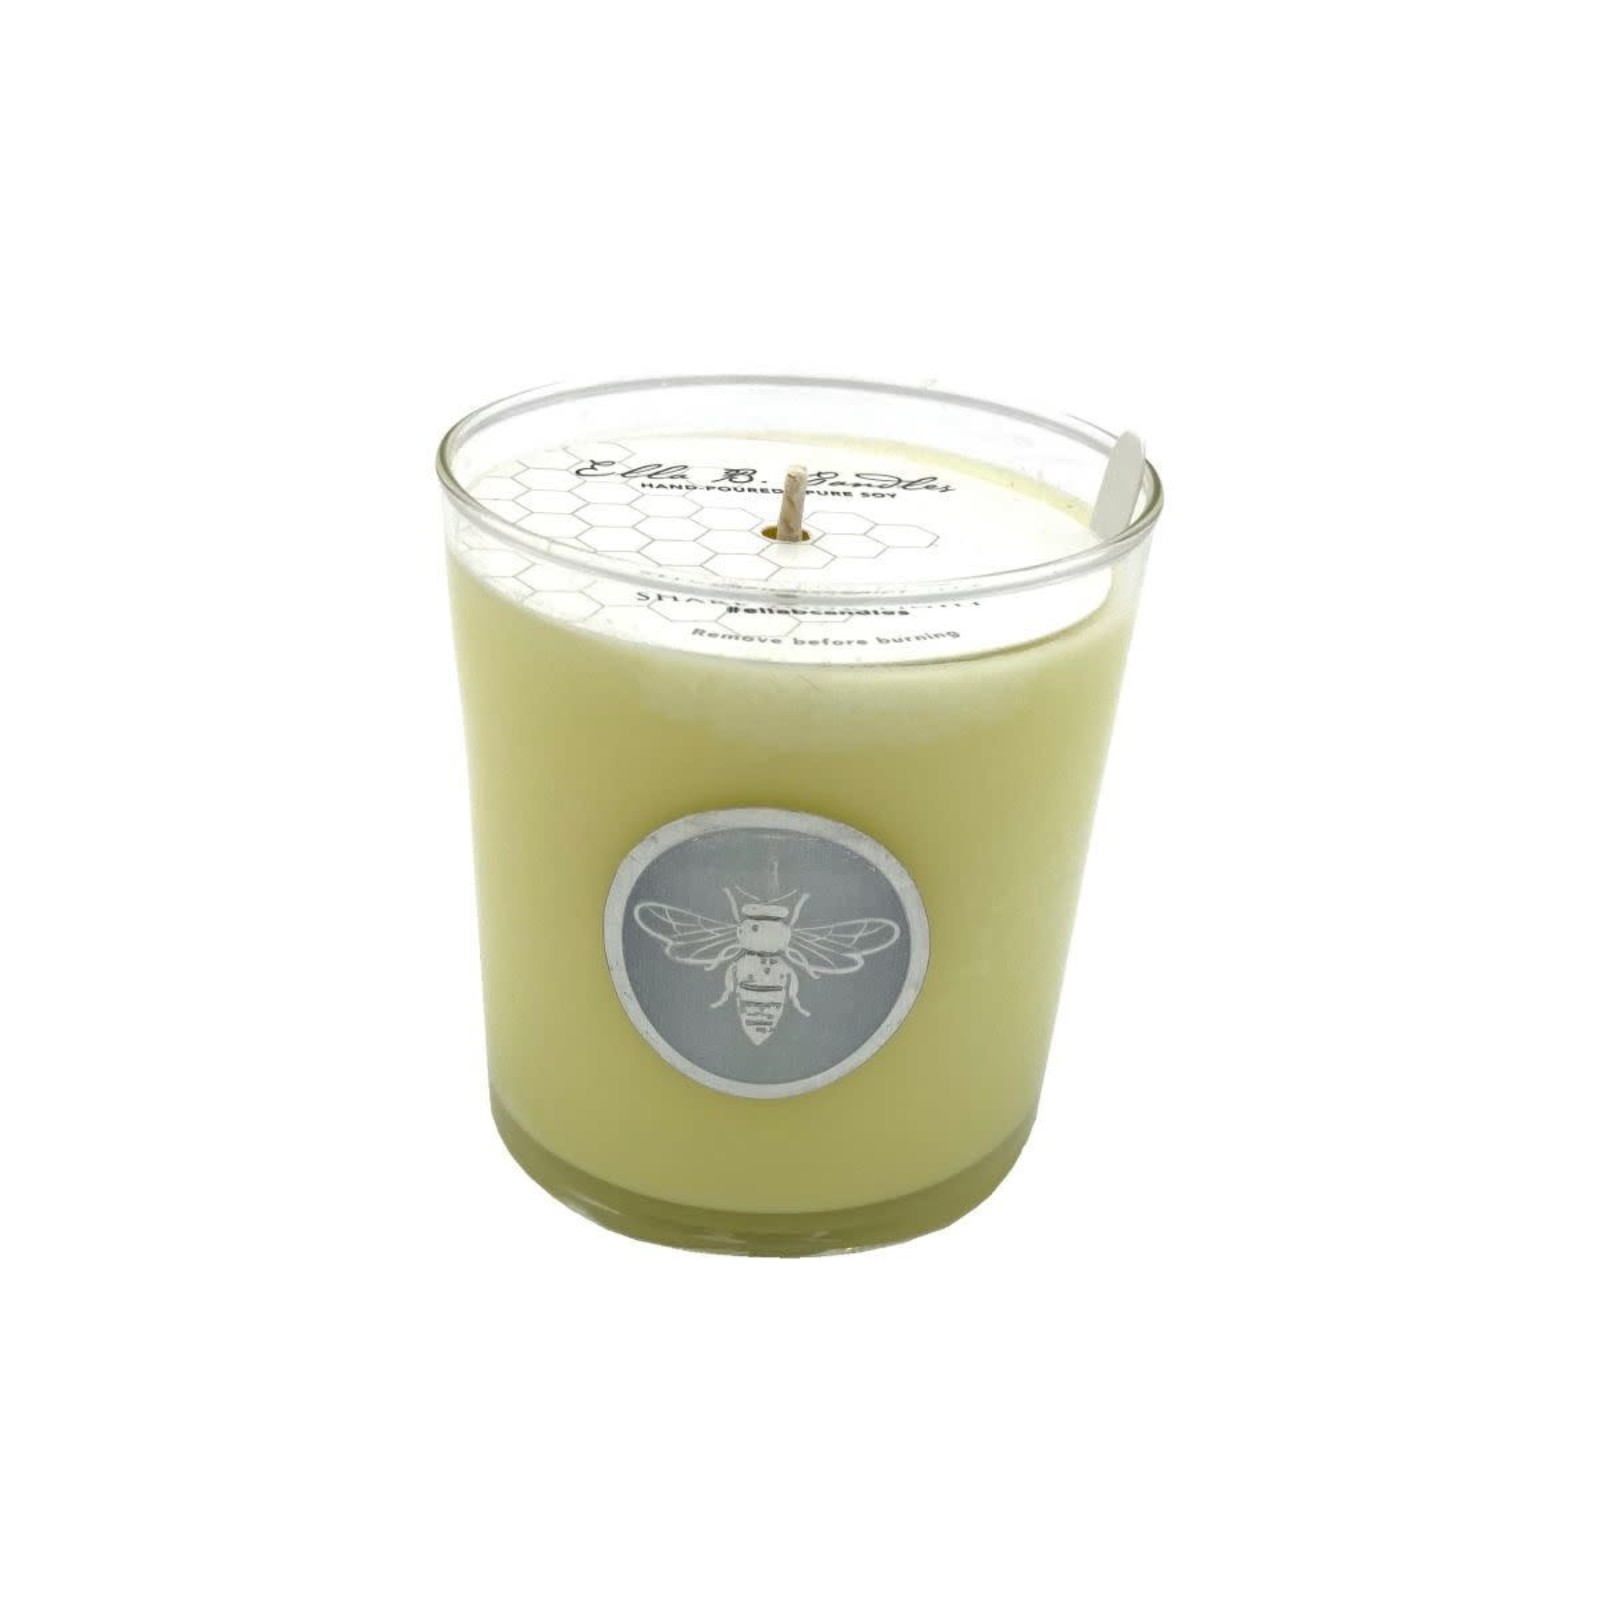 Ella B Candles Hand-Poured Soy Candle-Main Street  EB-NBS08 loading=